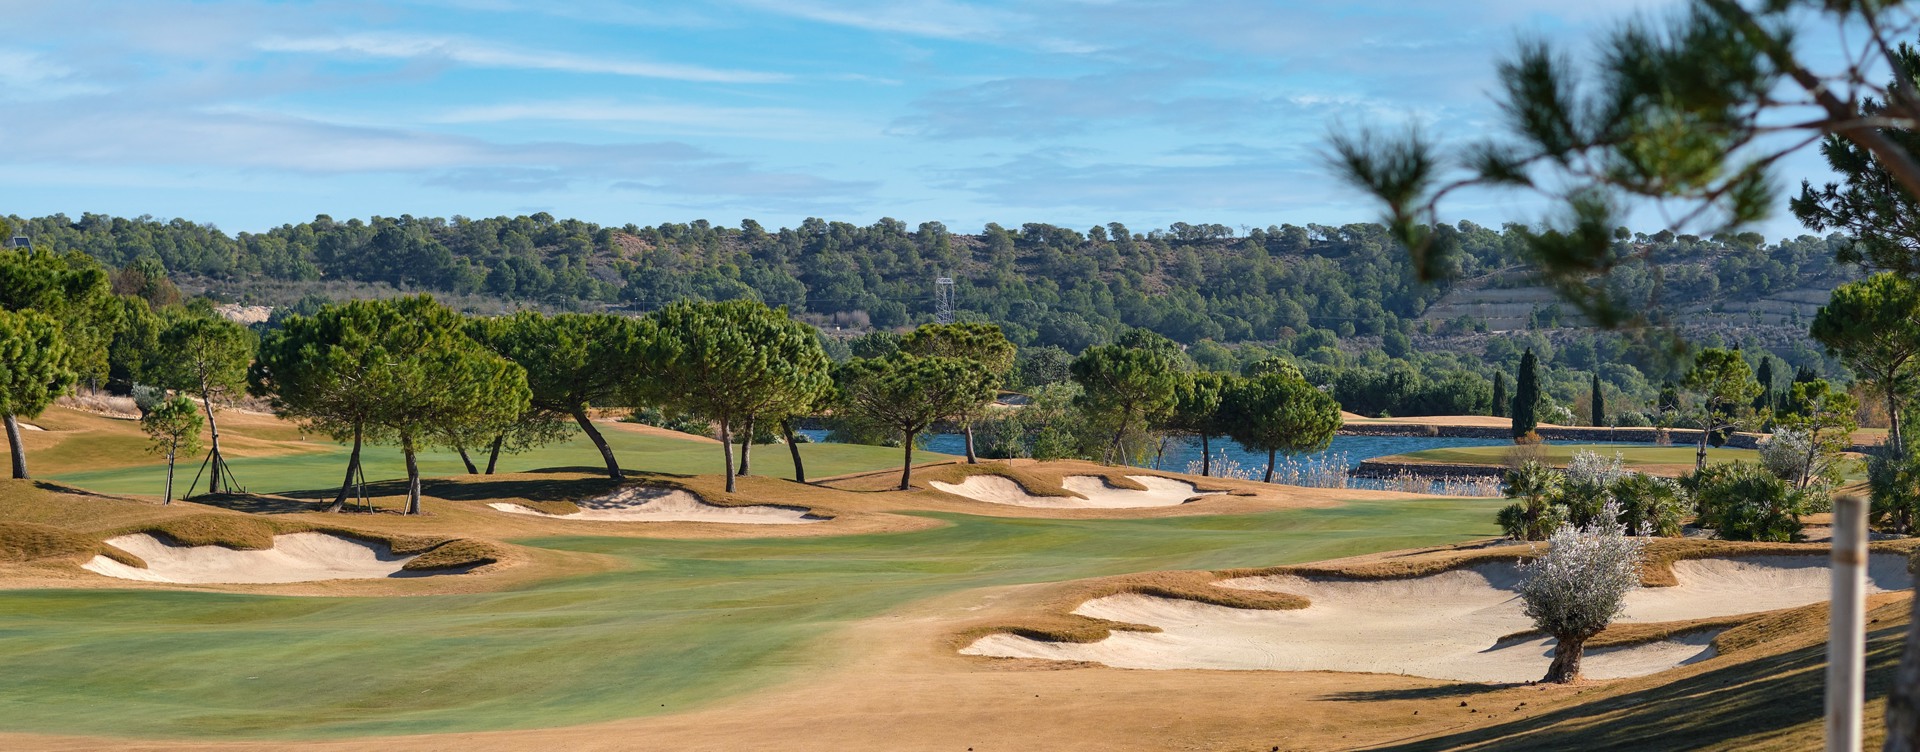 Play a round of golf with stunning views over
the Spanish interior or the Mediterranean Sea